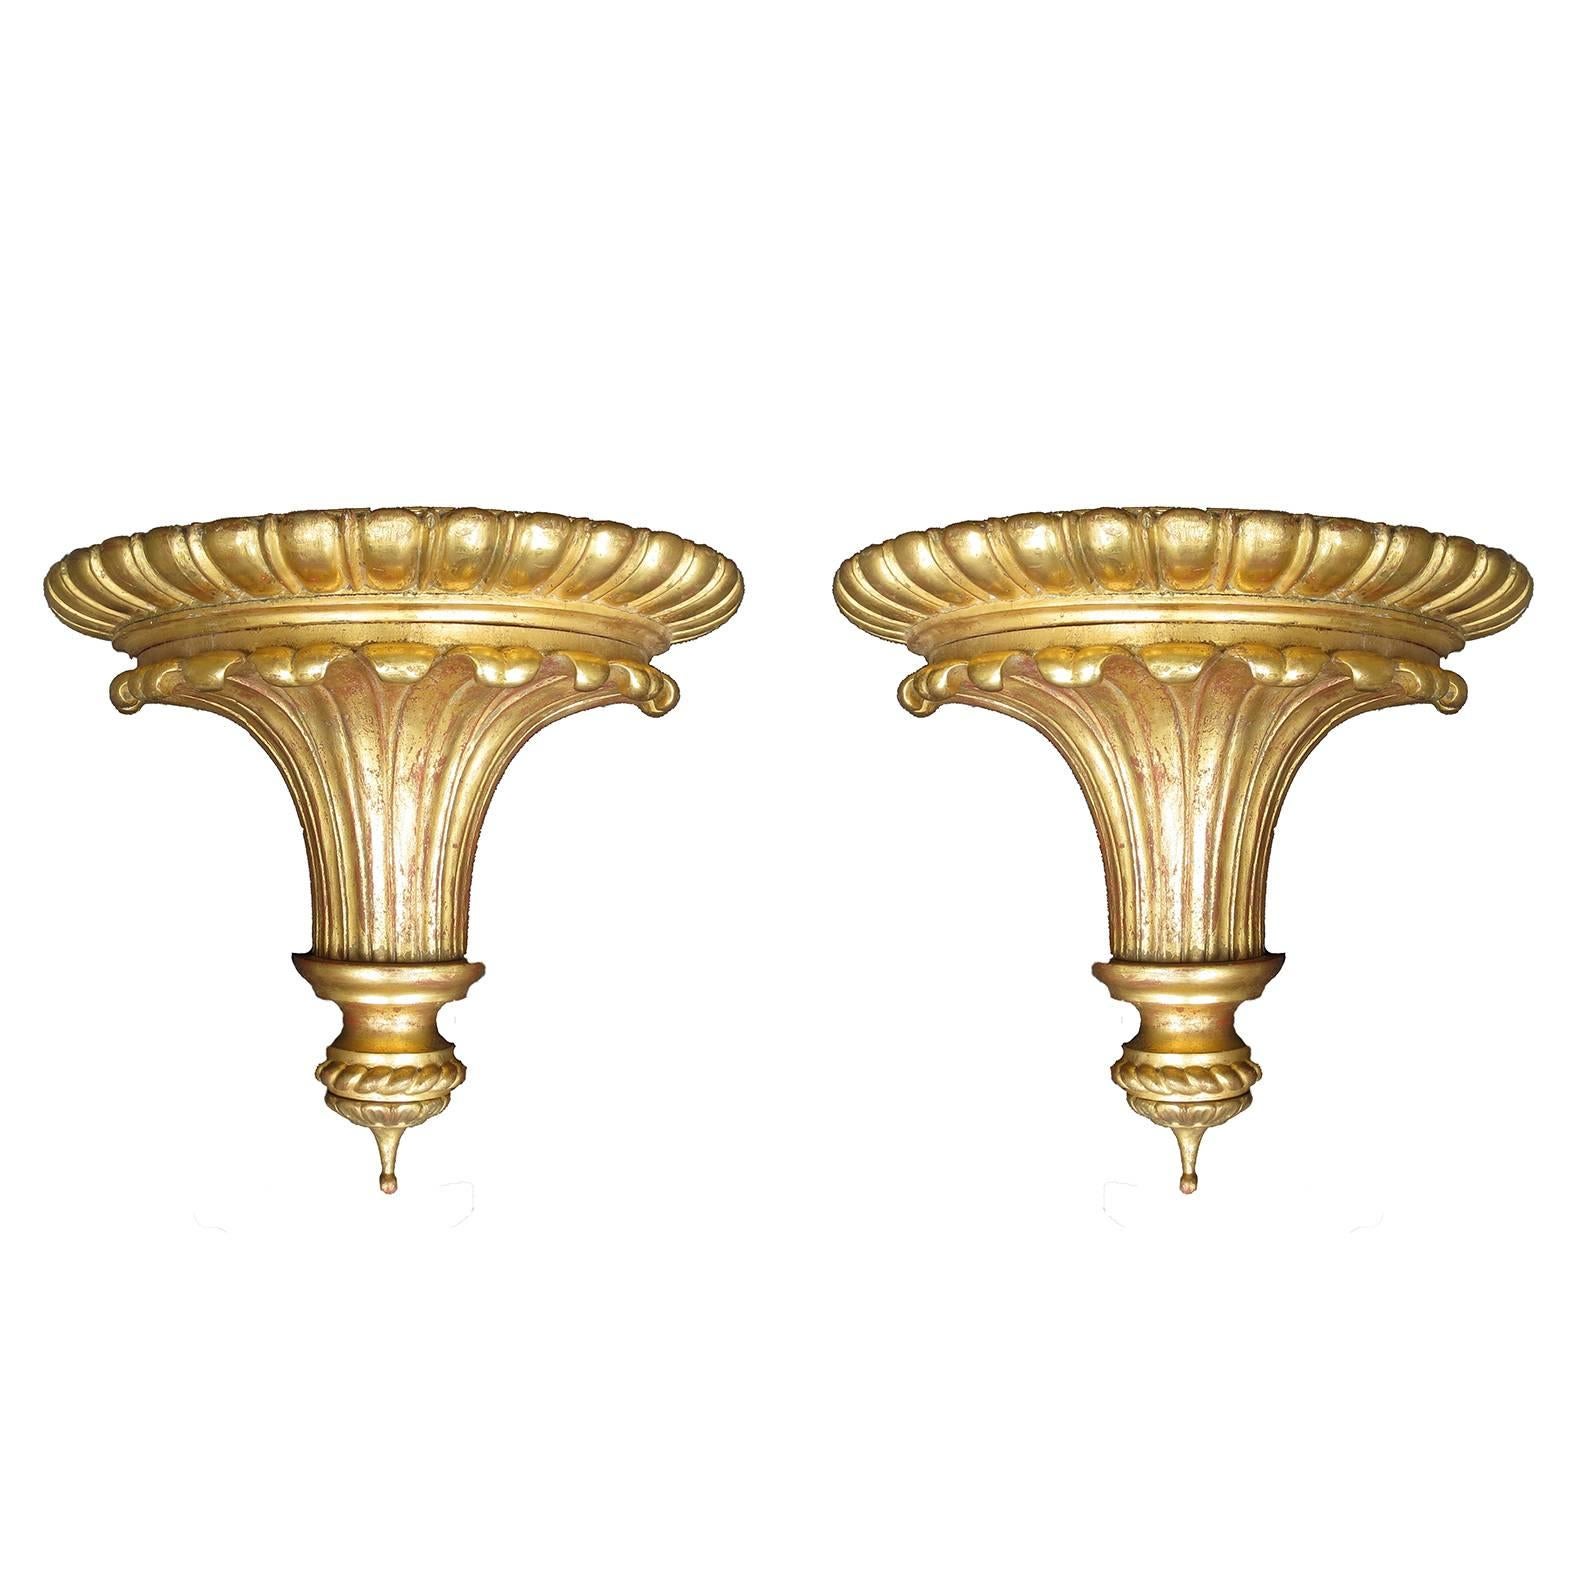 Pair of 19th-20th Century Large English Giltwood Brackets